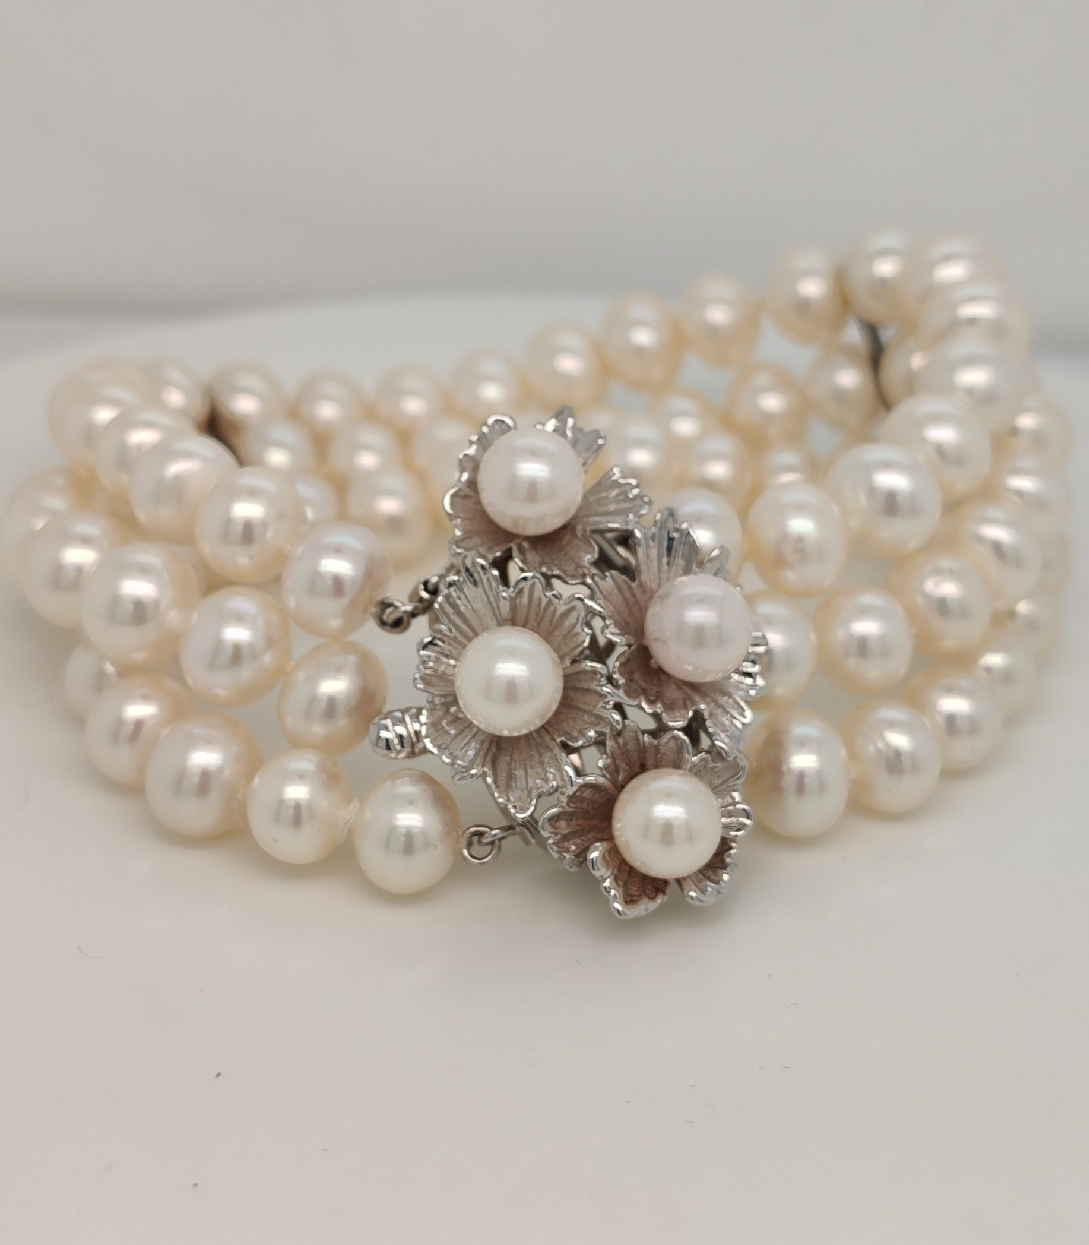 Triple Strand Pearl Bracelet with 14K White Gold Clasp